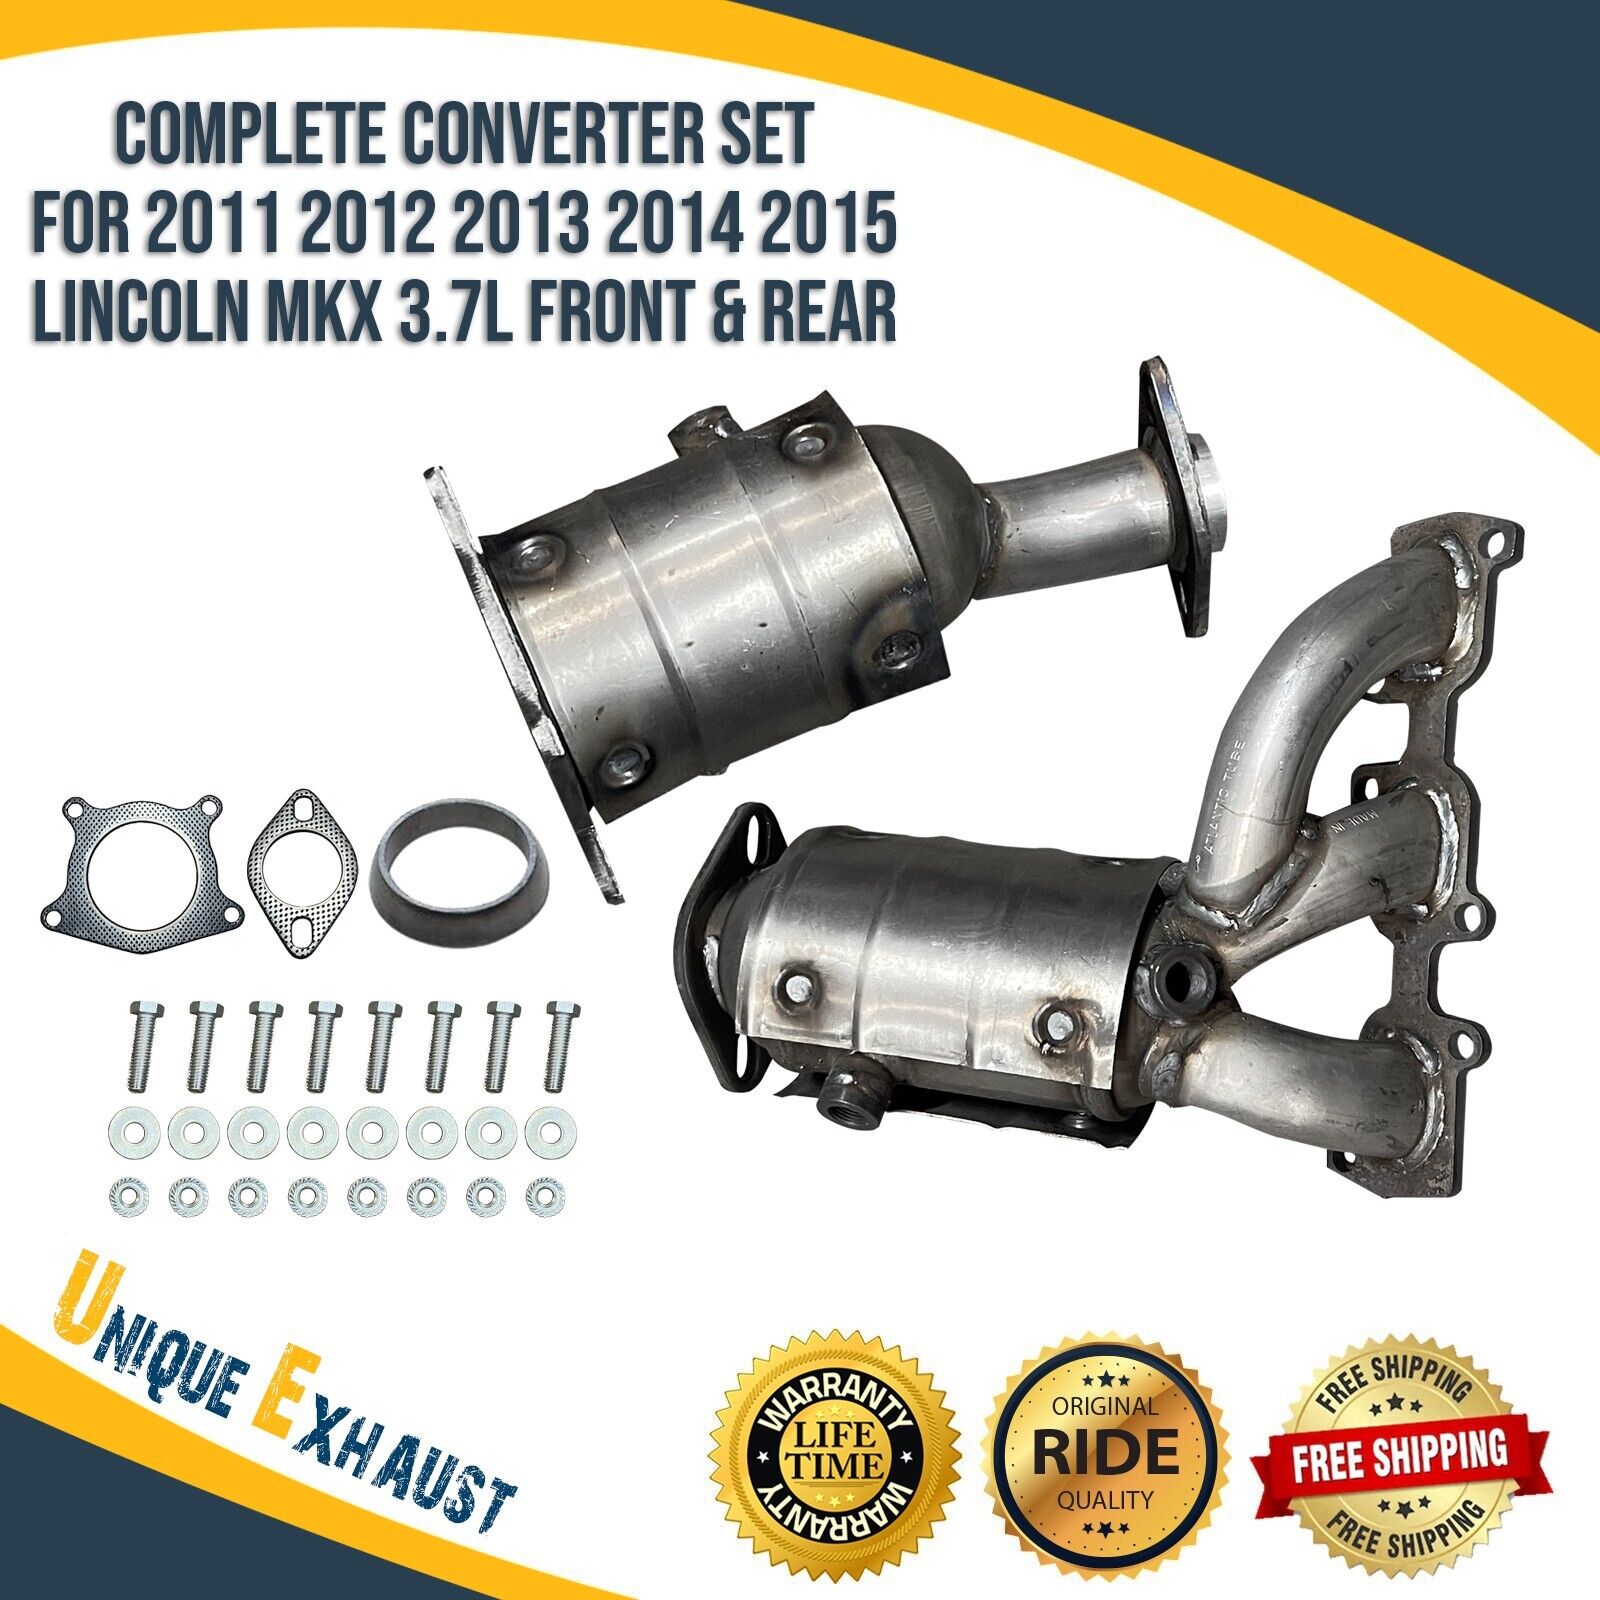 Catalytic Converter Set For 2011 2012 2013 2014 2015 Lincoln MKX 3.7L Front&Rear